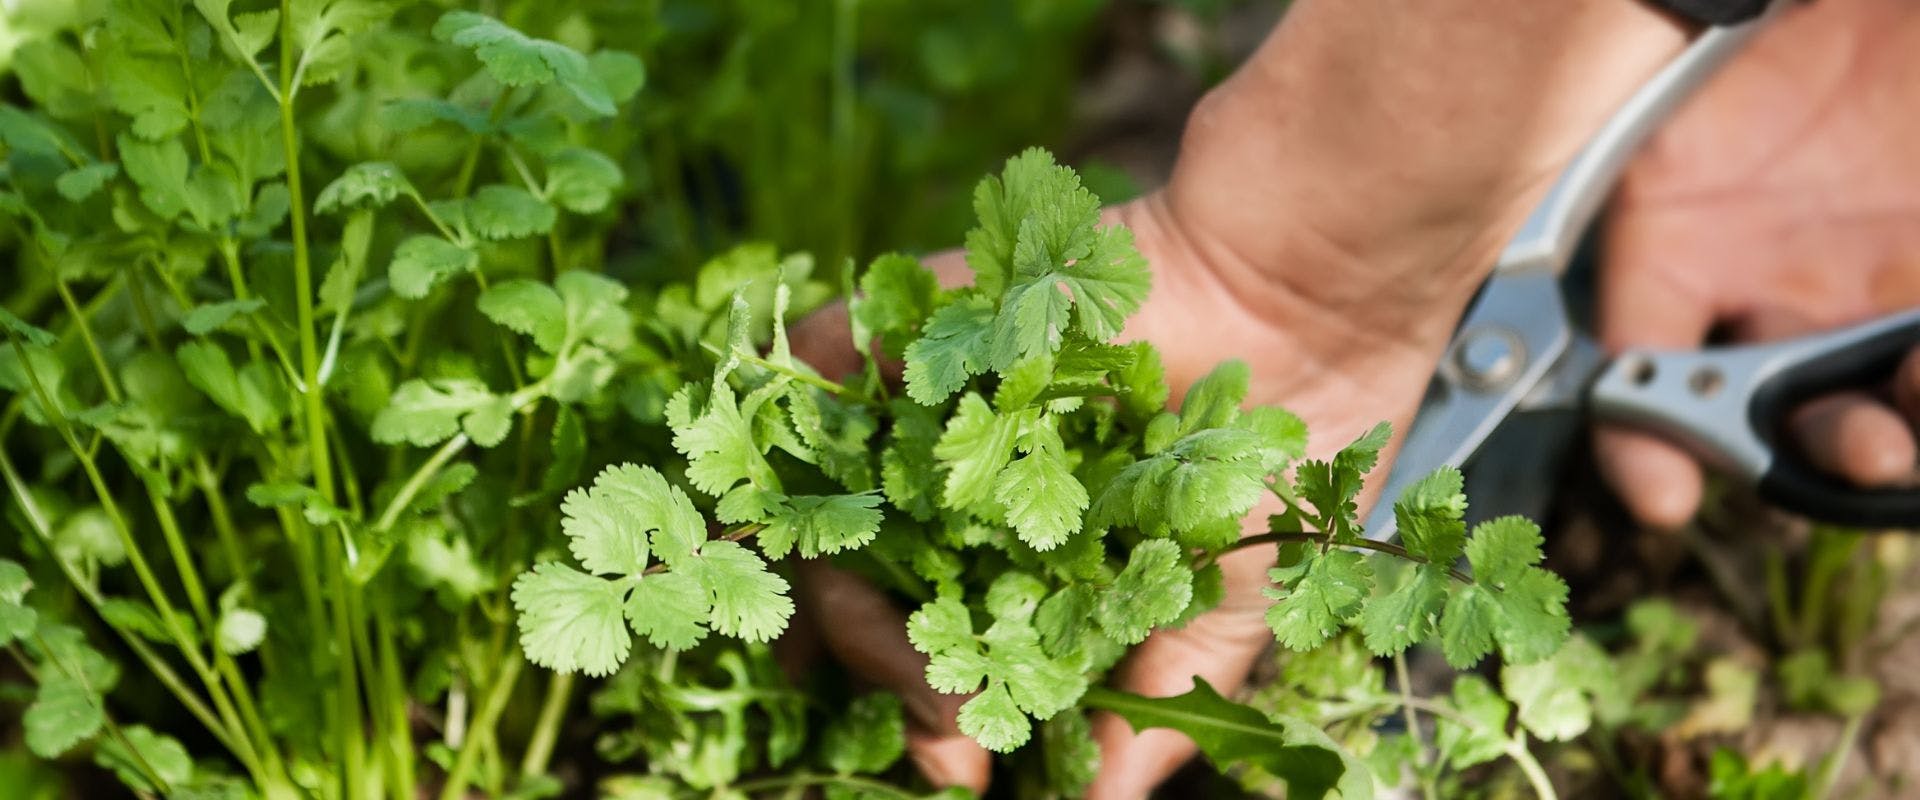 Cilantro being harvested